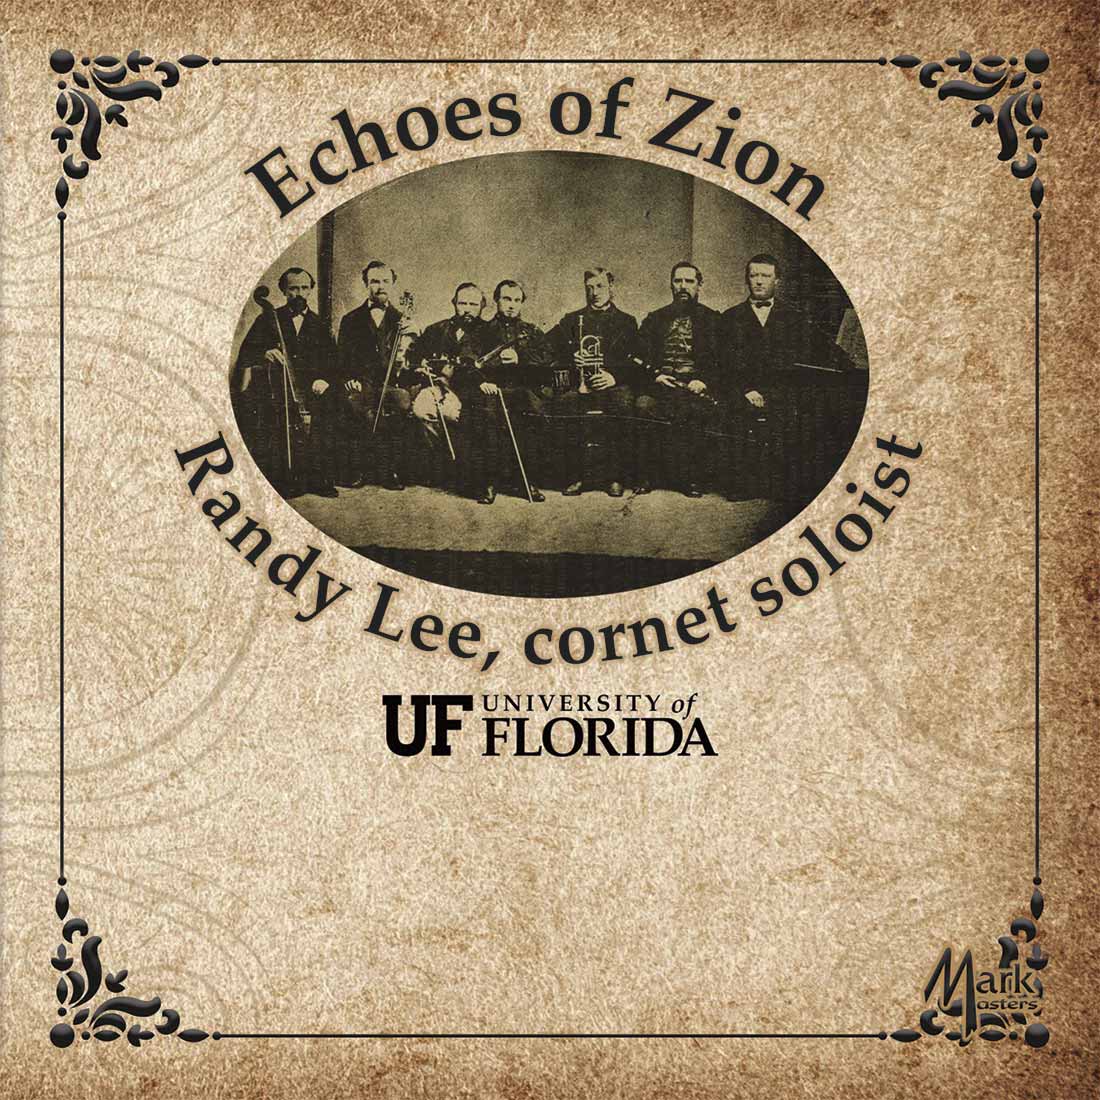 Randolph Lee — “Echoes of Zion” (Mark Masters Series, 2022)